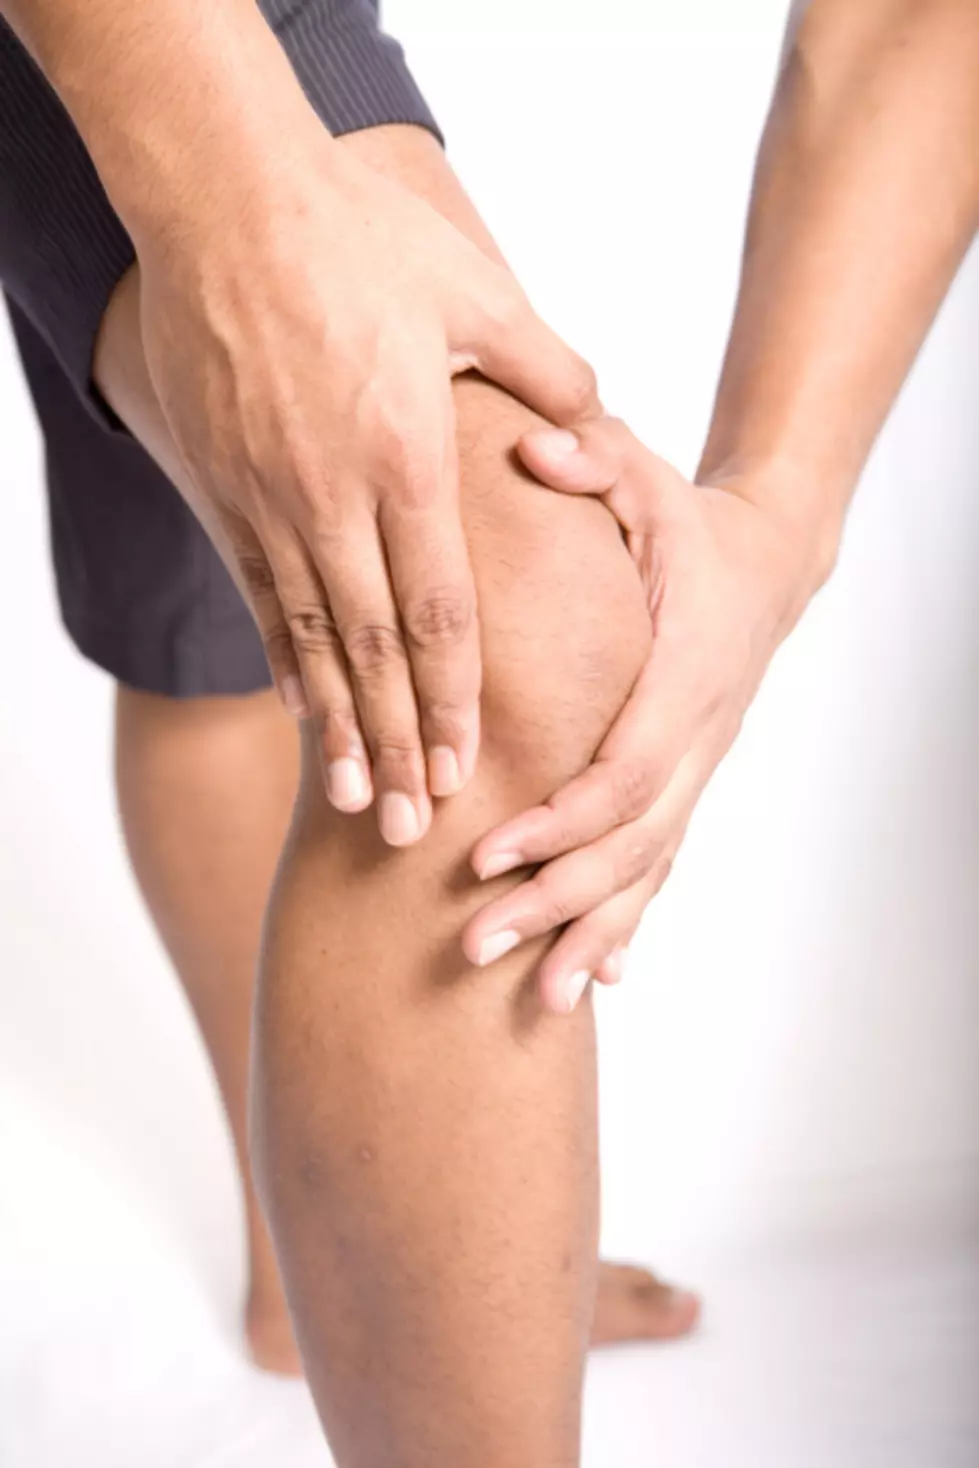 Knee injuries in child athletes are preventable